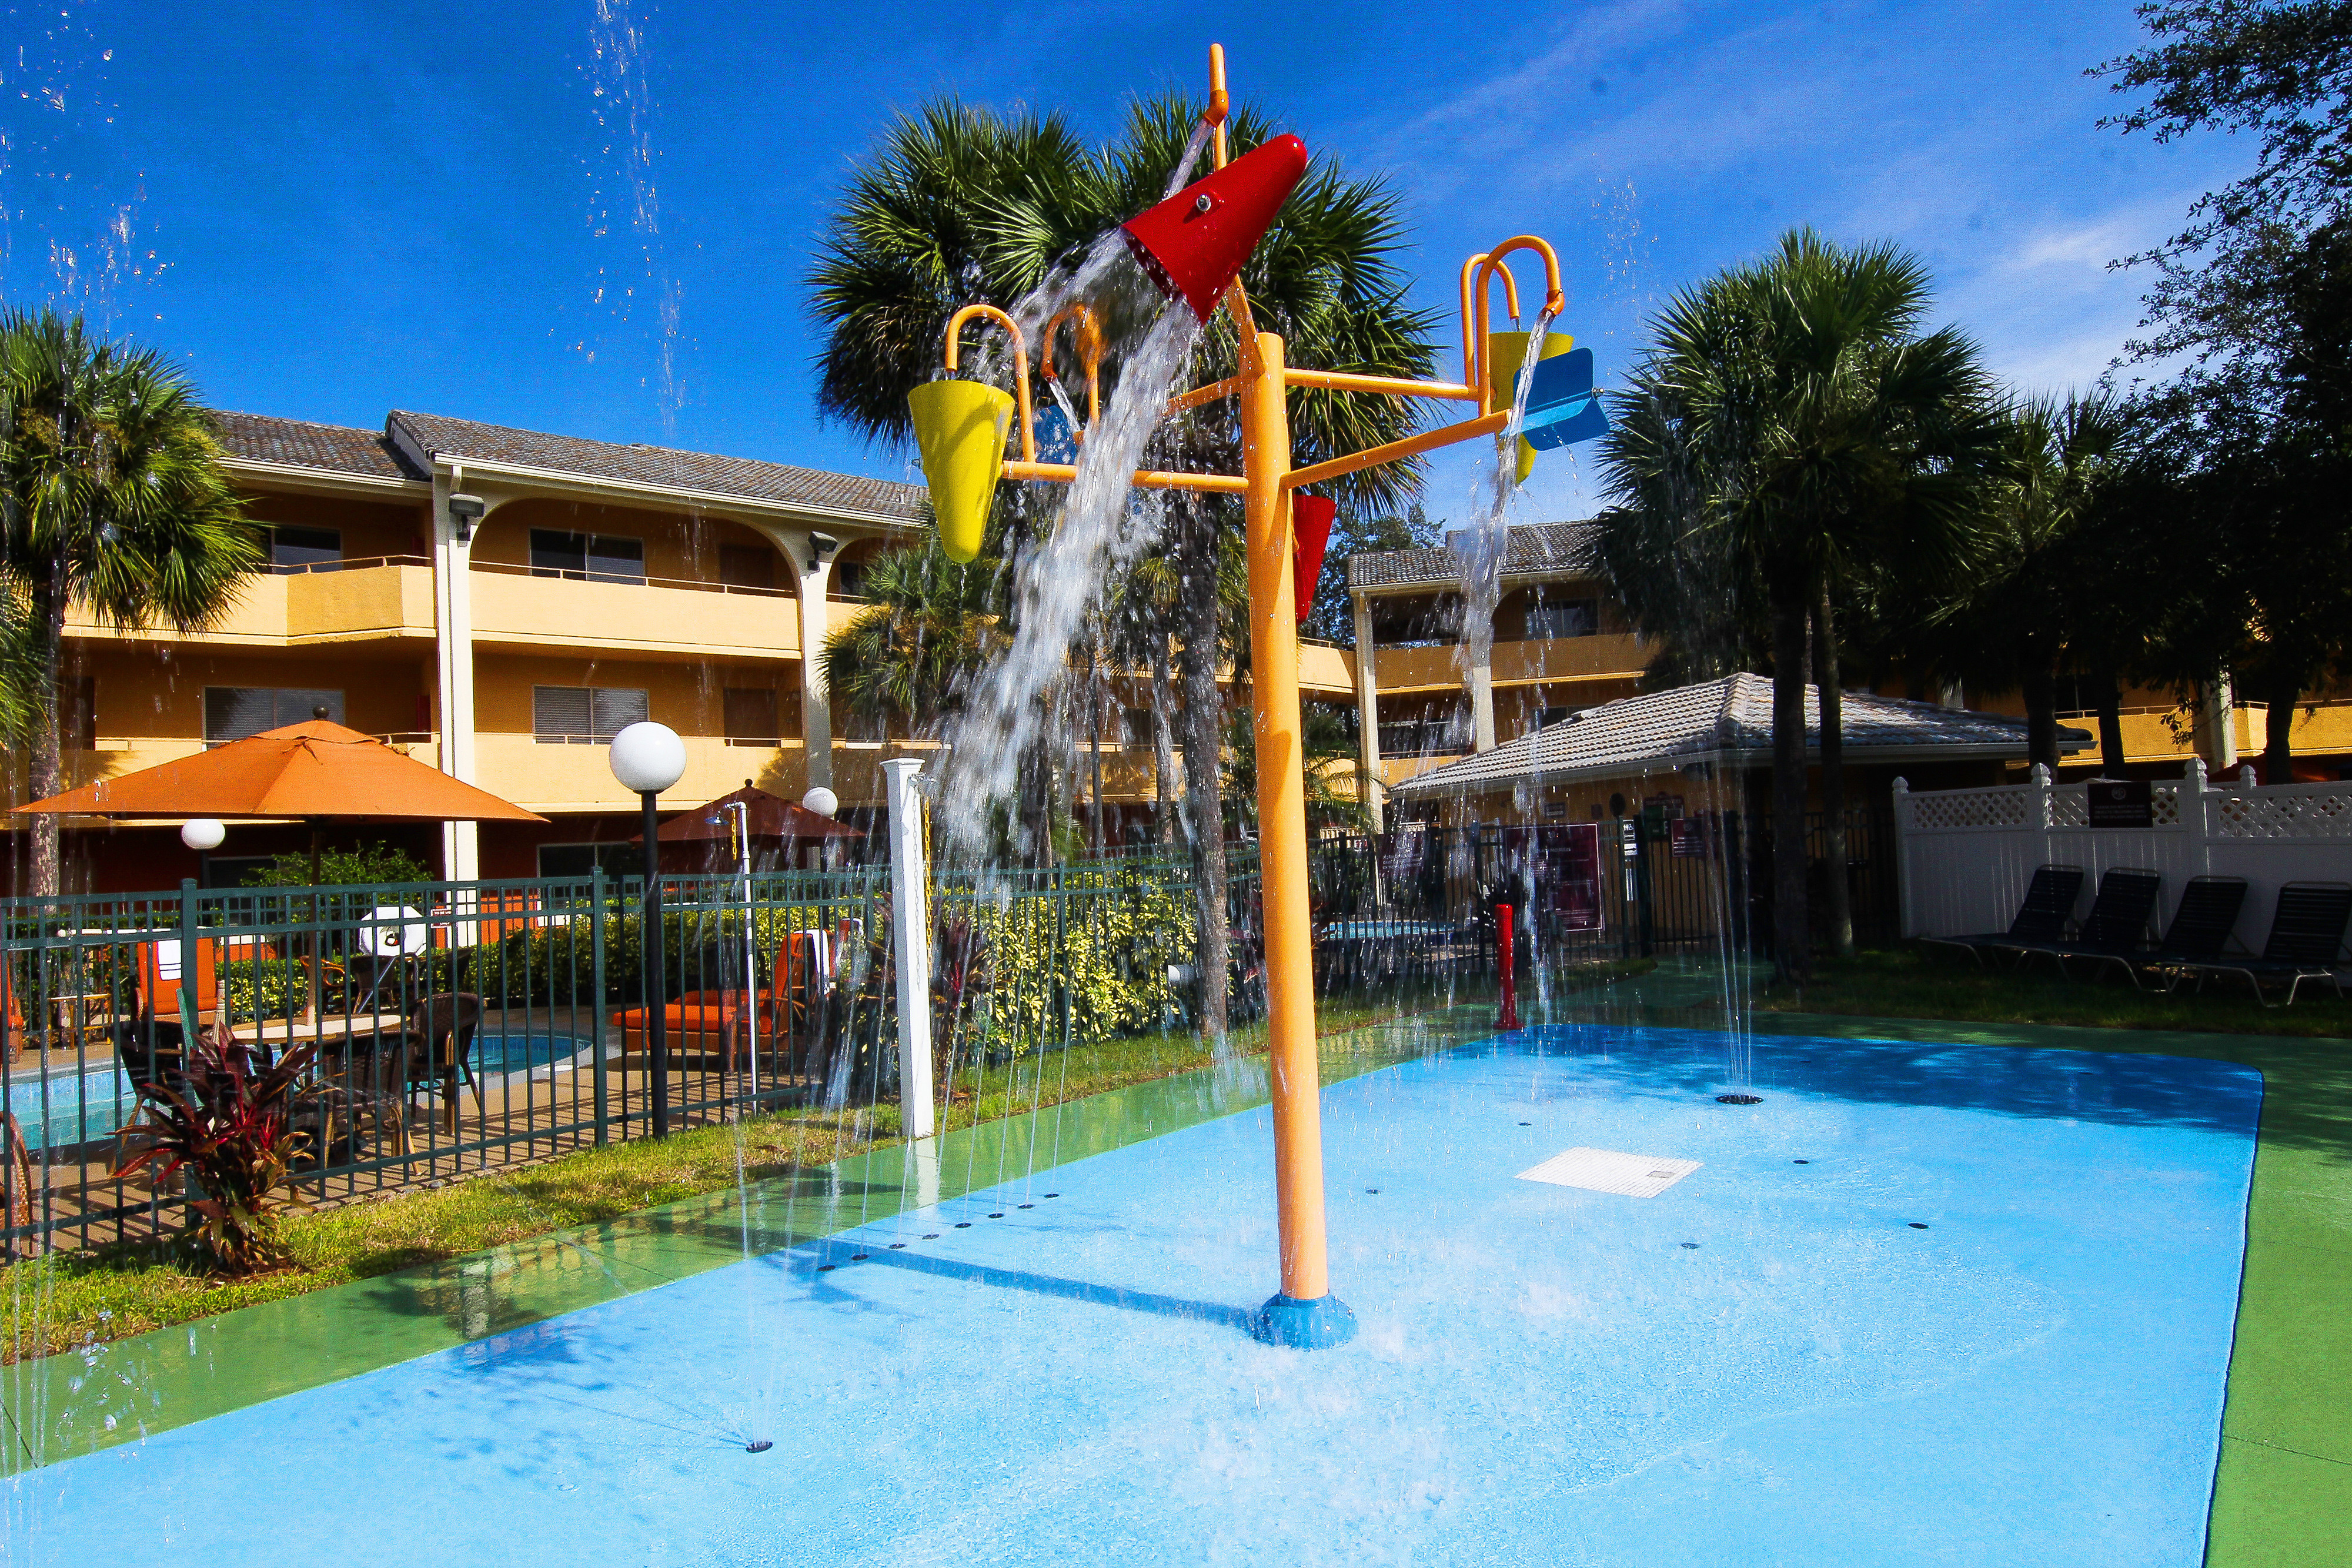 Children's Water Play Area with Heated Outdoor Pool in background | Westgate Leisure Resort